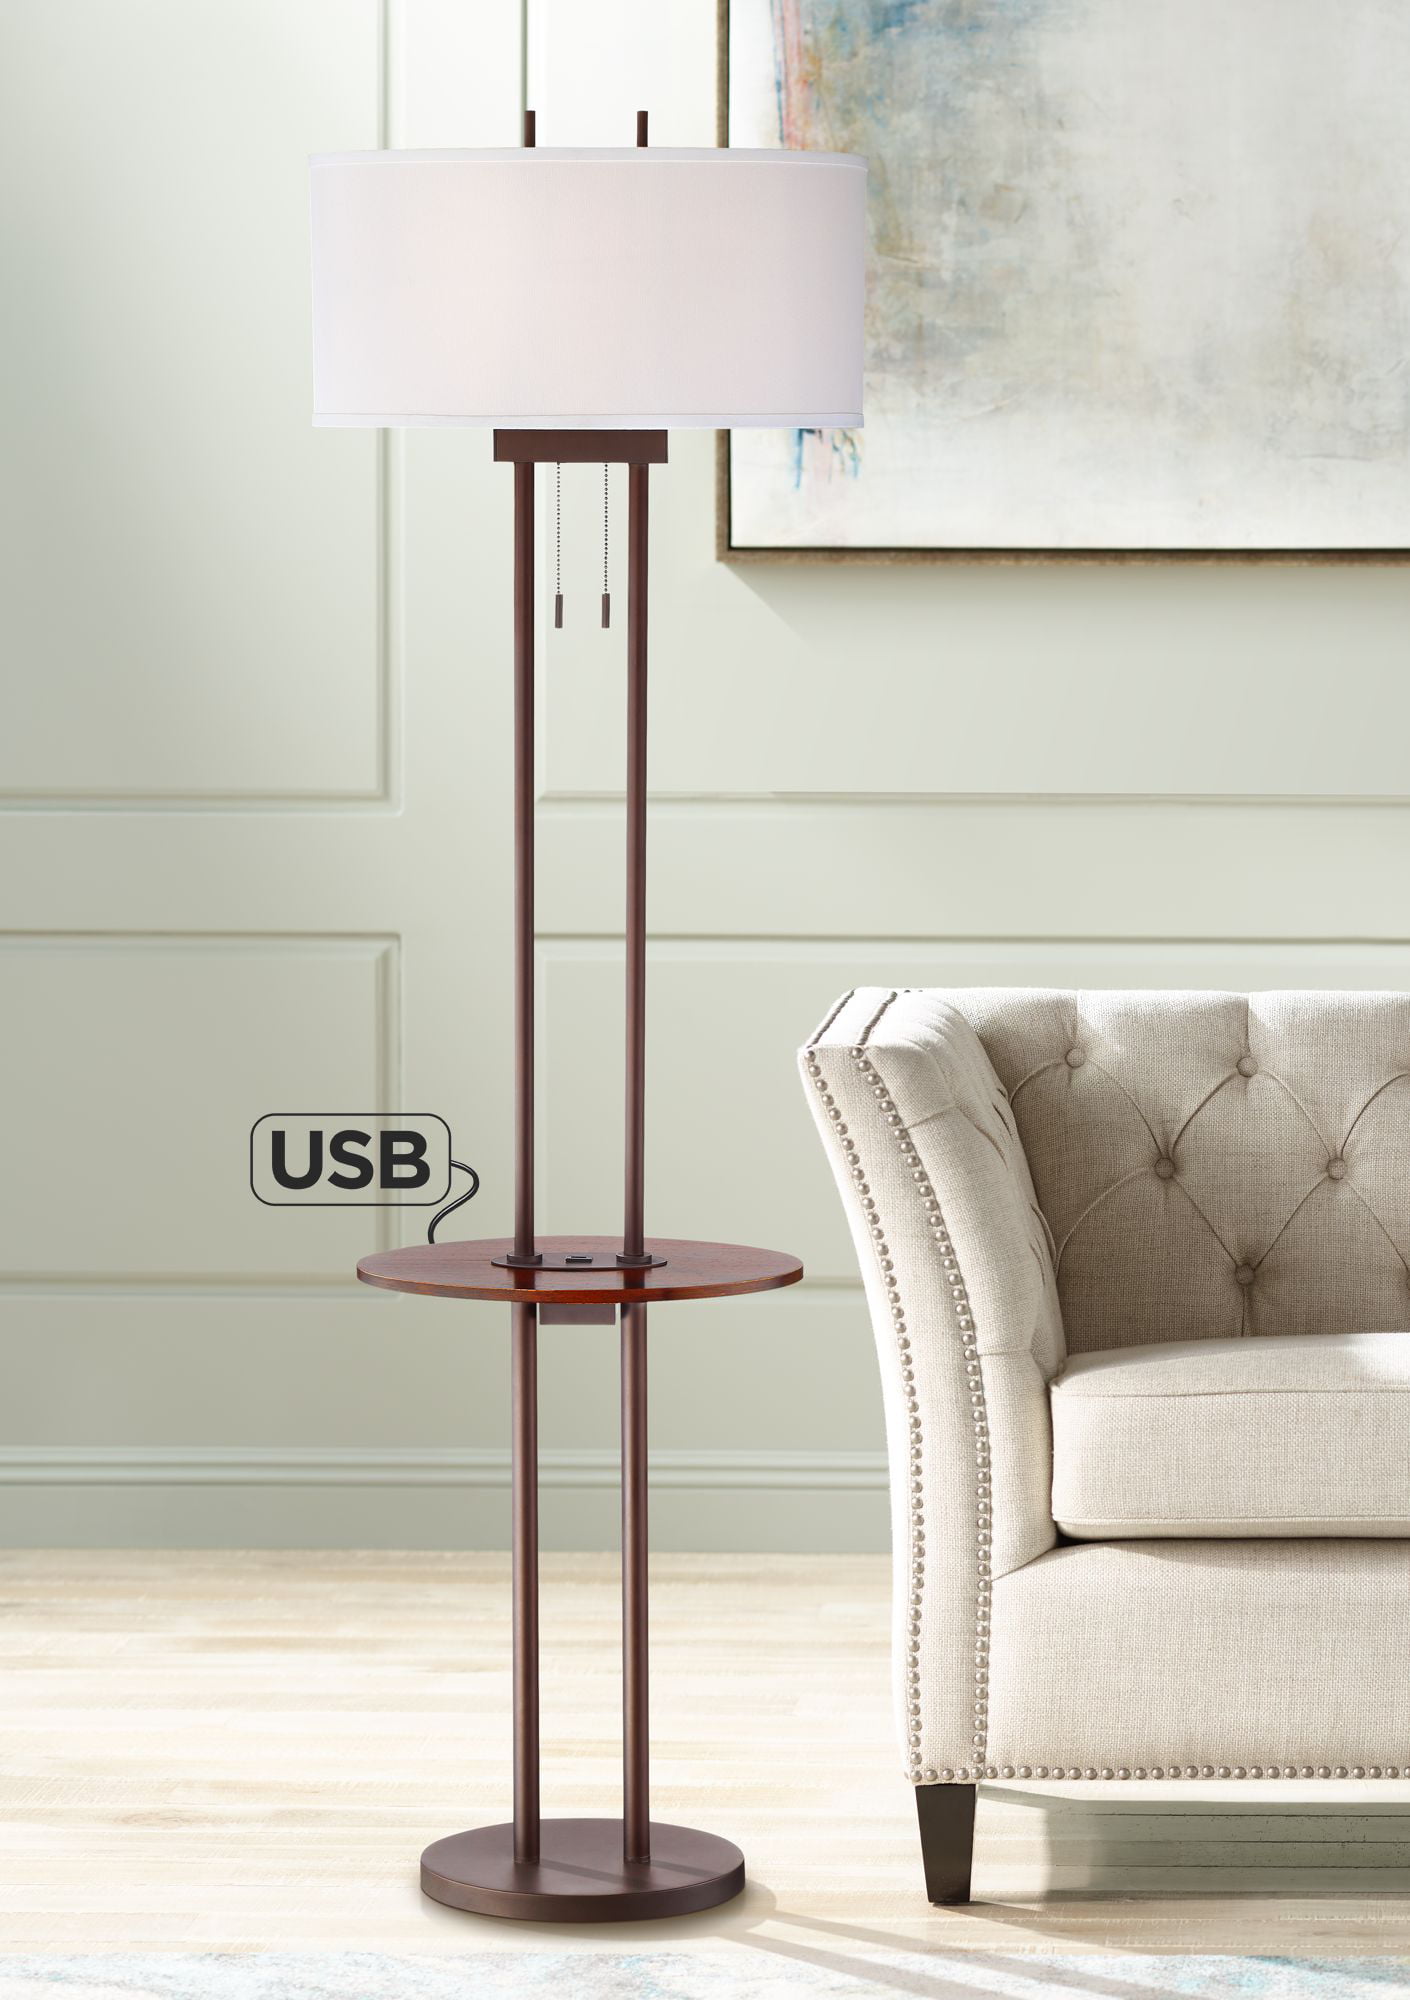 Possini Euro Design Modern Floor Lamp, Vogue Floor Lamp With Tray Table And Usb Port